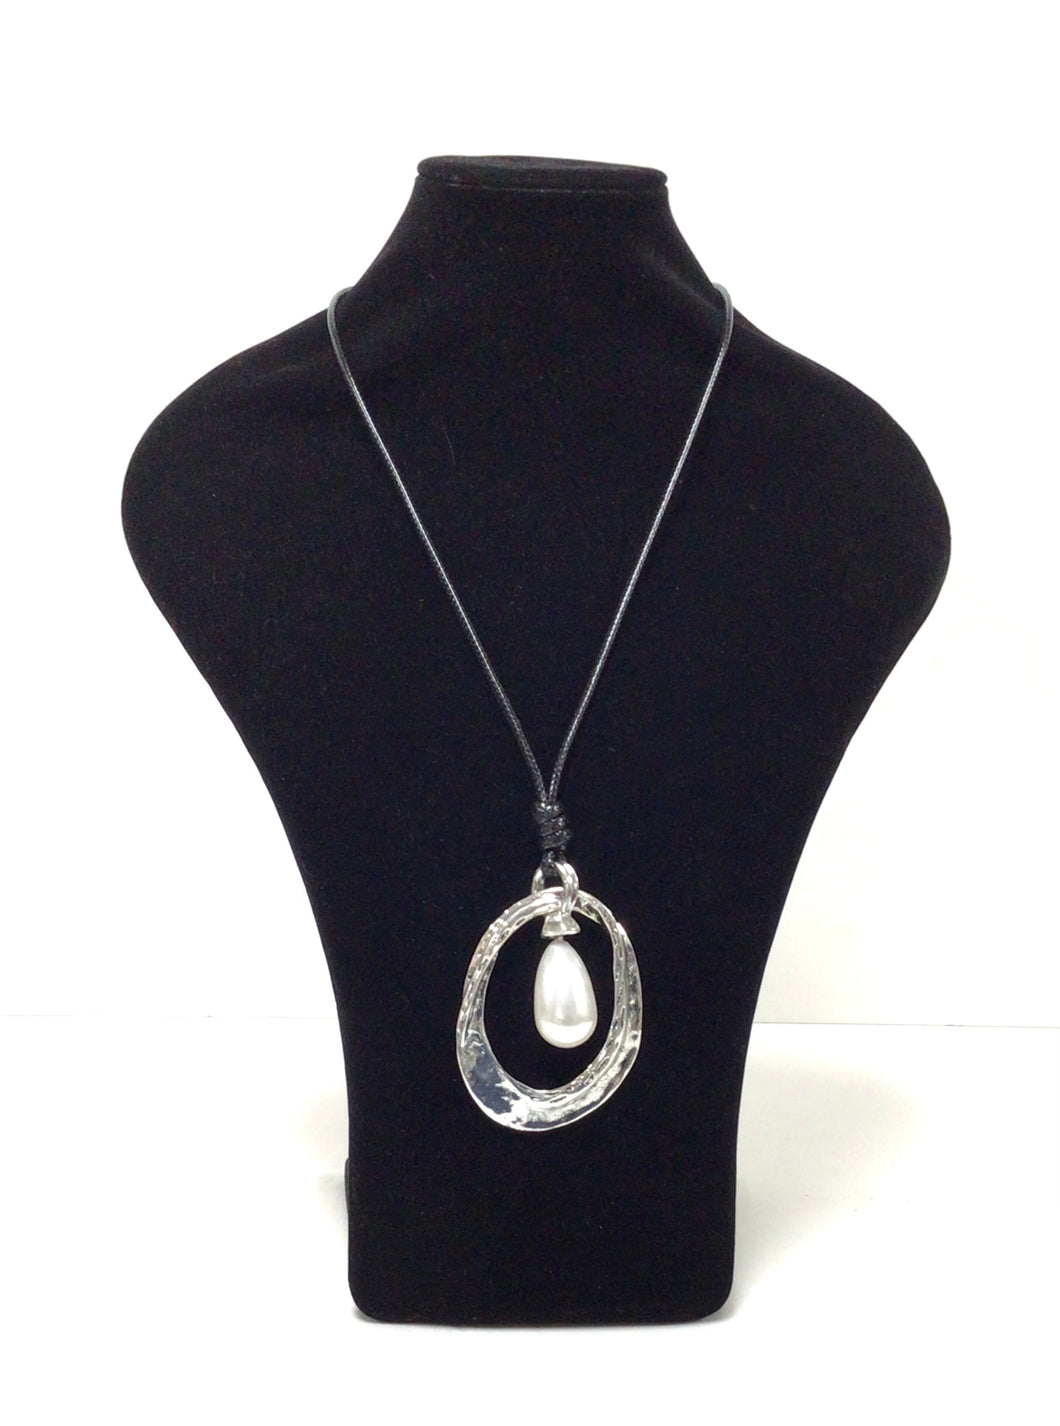 Pendant necklace has an elongated oval in silver-tone, mottled metal. The oval pendant  is accentuated with a large single teardrop-shaped faux pearl that hands in the oval. The pendant is hung on a simple black braided cord that does have a lobster claw clasp that can add an additional 2